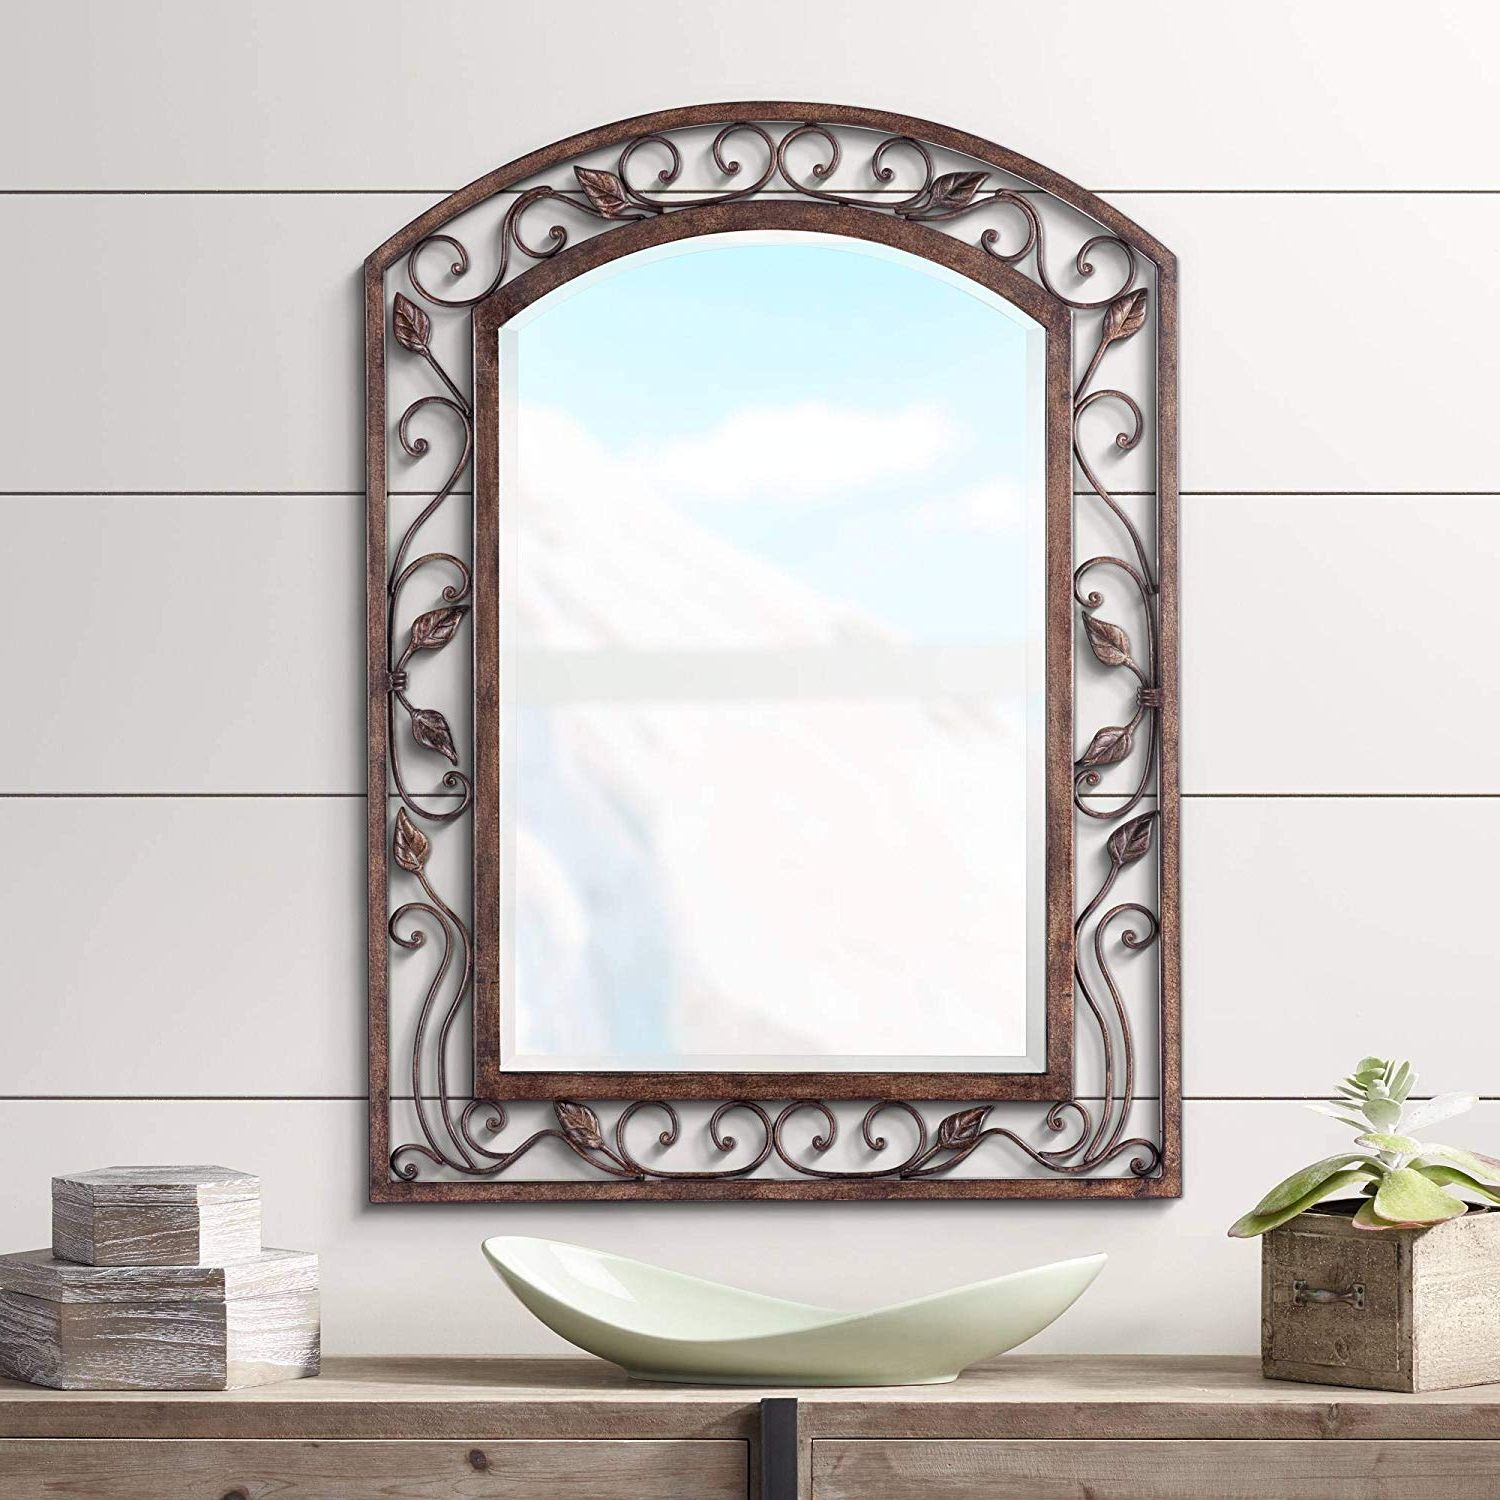 Arch Wall Mirrors Throughout 2019 Franklin Iron Works Eden Park Arch 25" X 34" Wall Mirror (View 11 of 20)